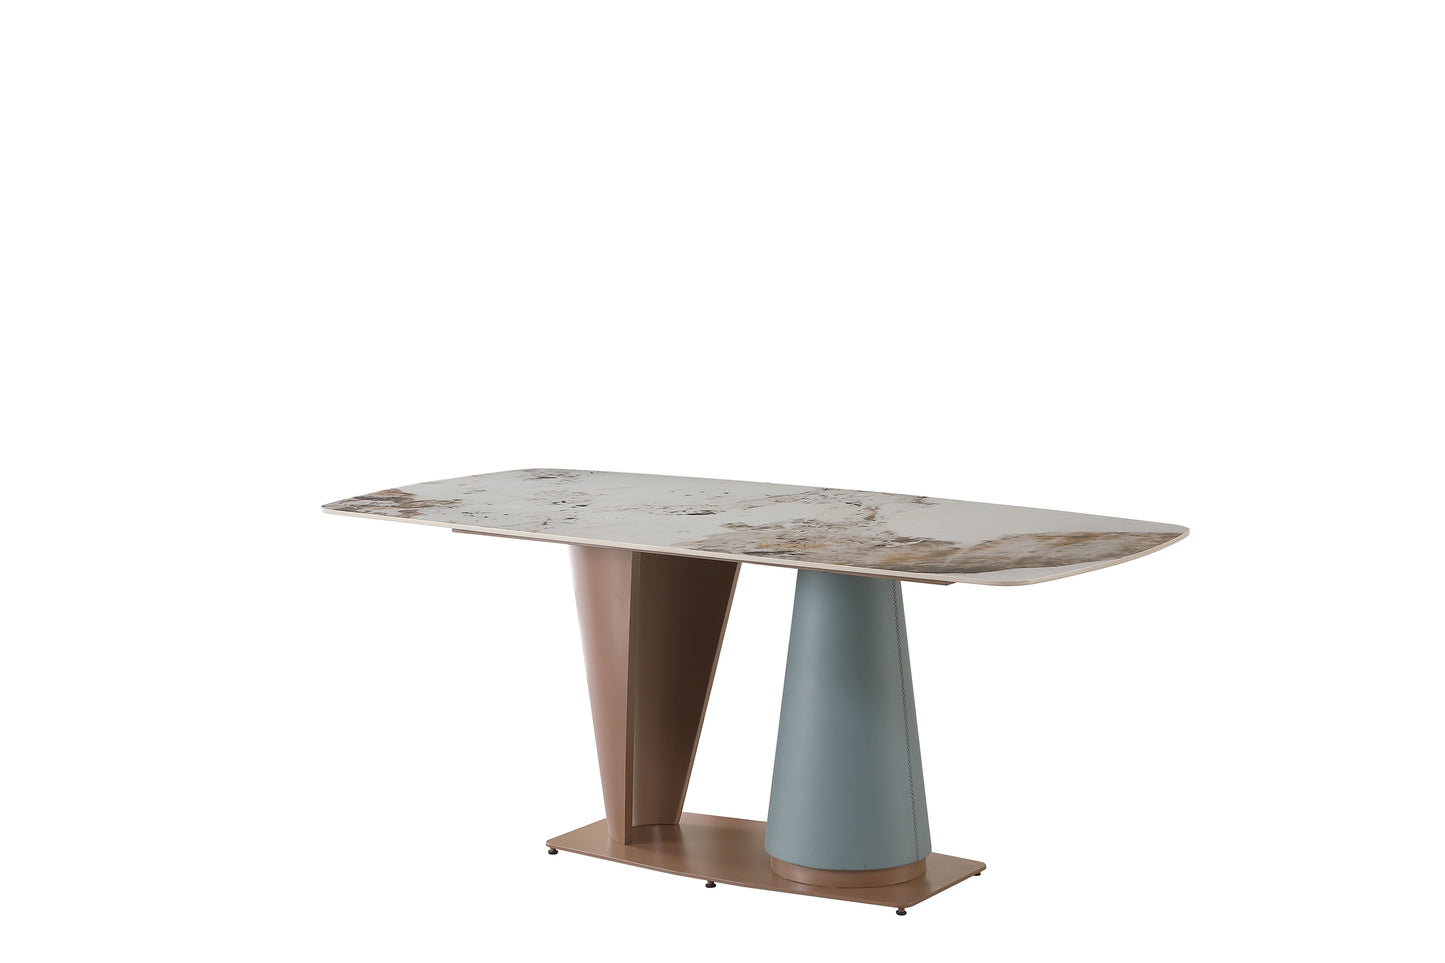 Pandora color sintered stone dining table